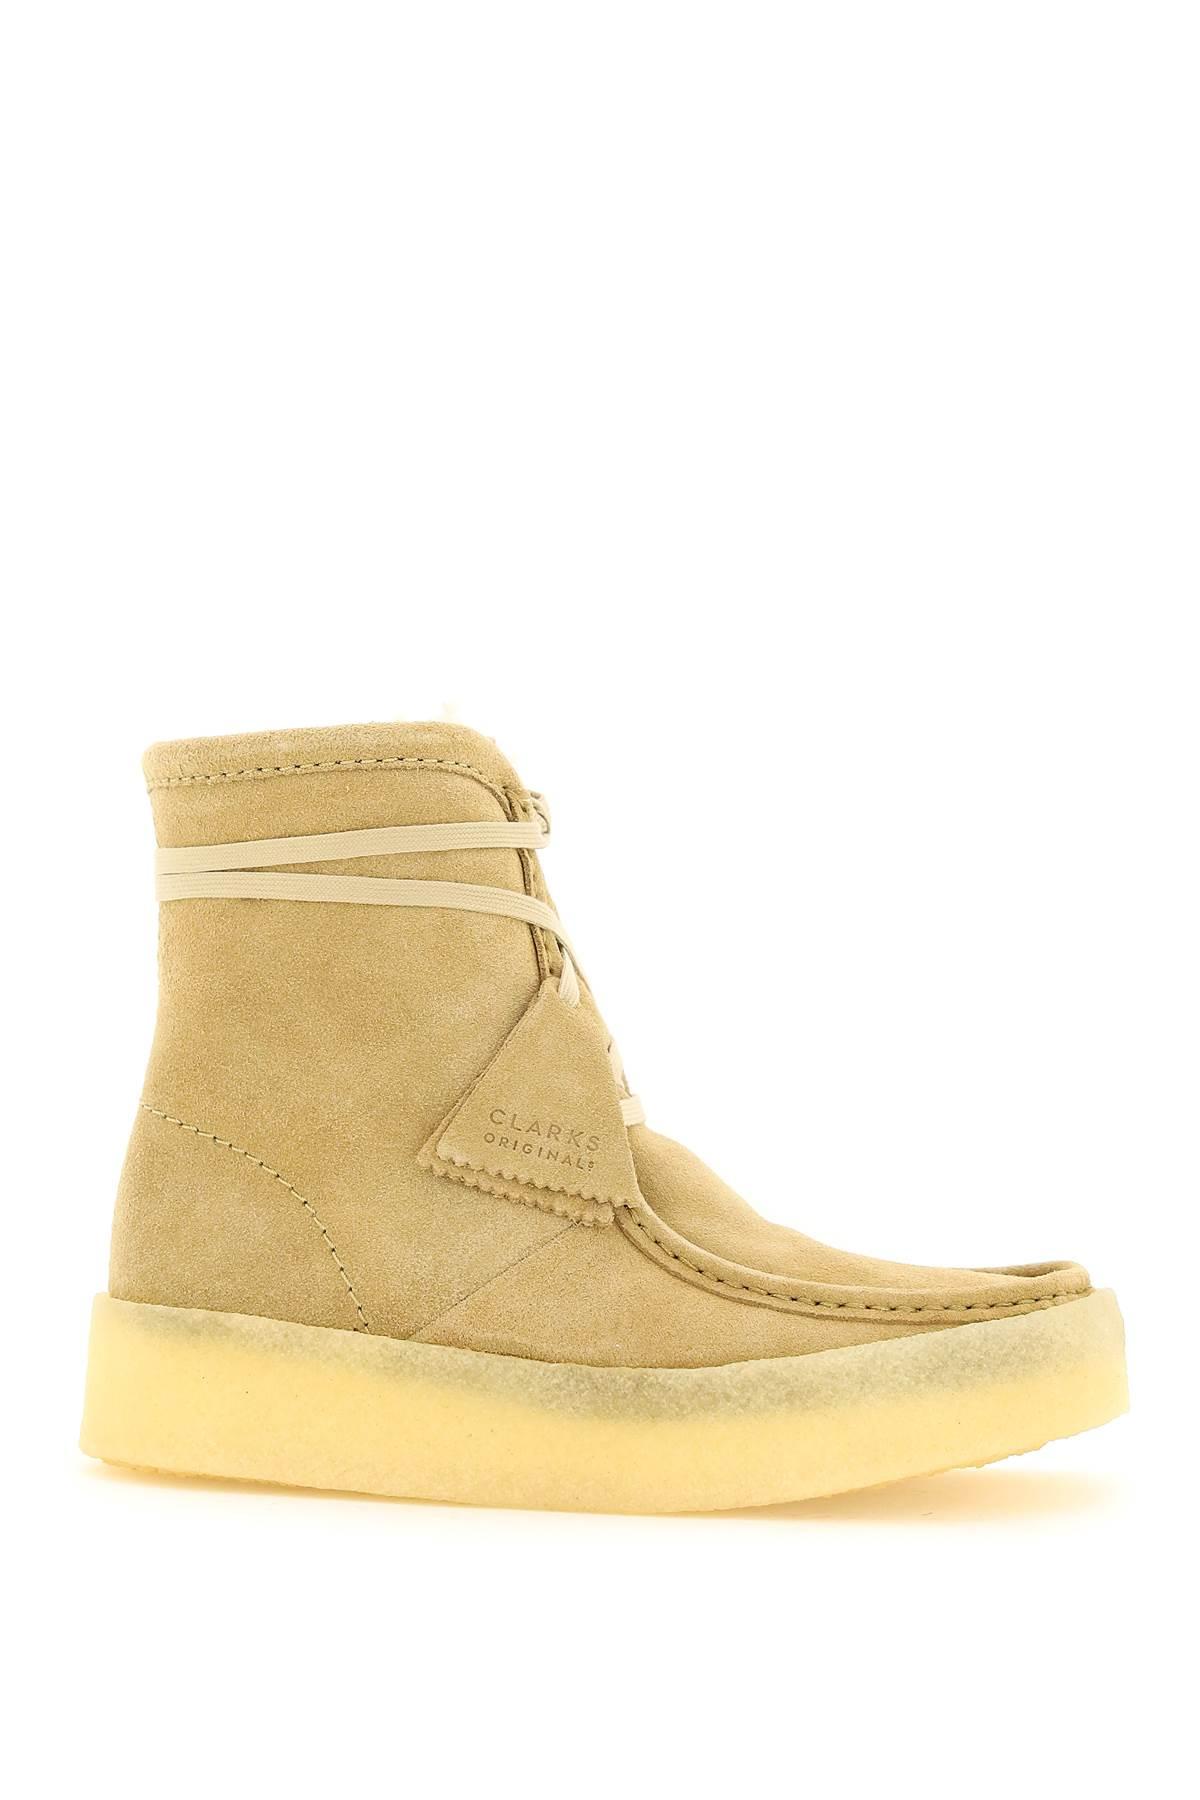 Clarks Wallabee Cup Lace-up Ankle Boots in Natural | Lyst